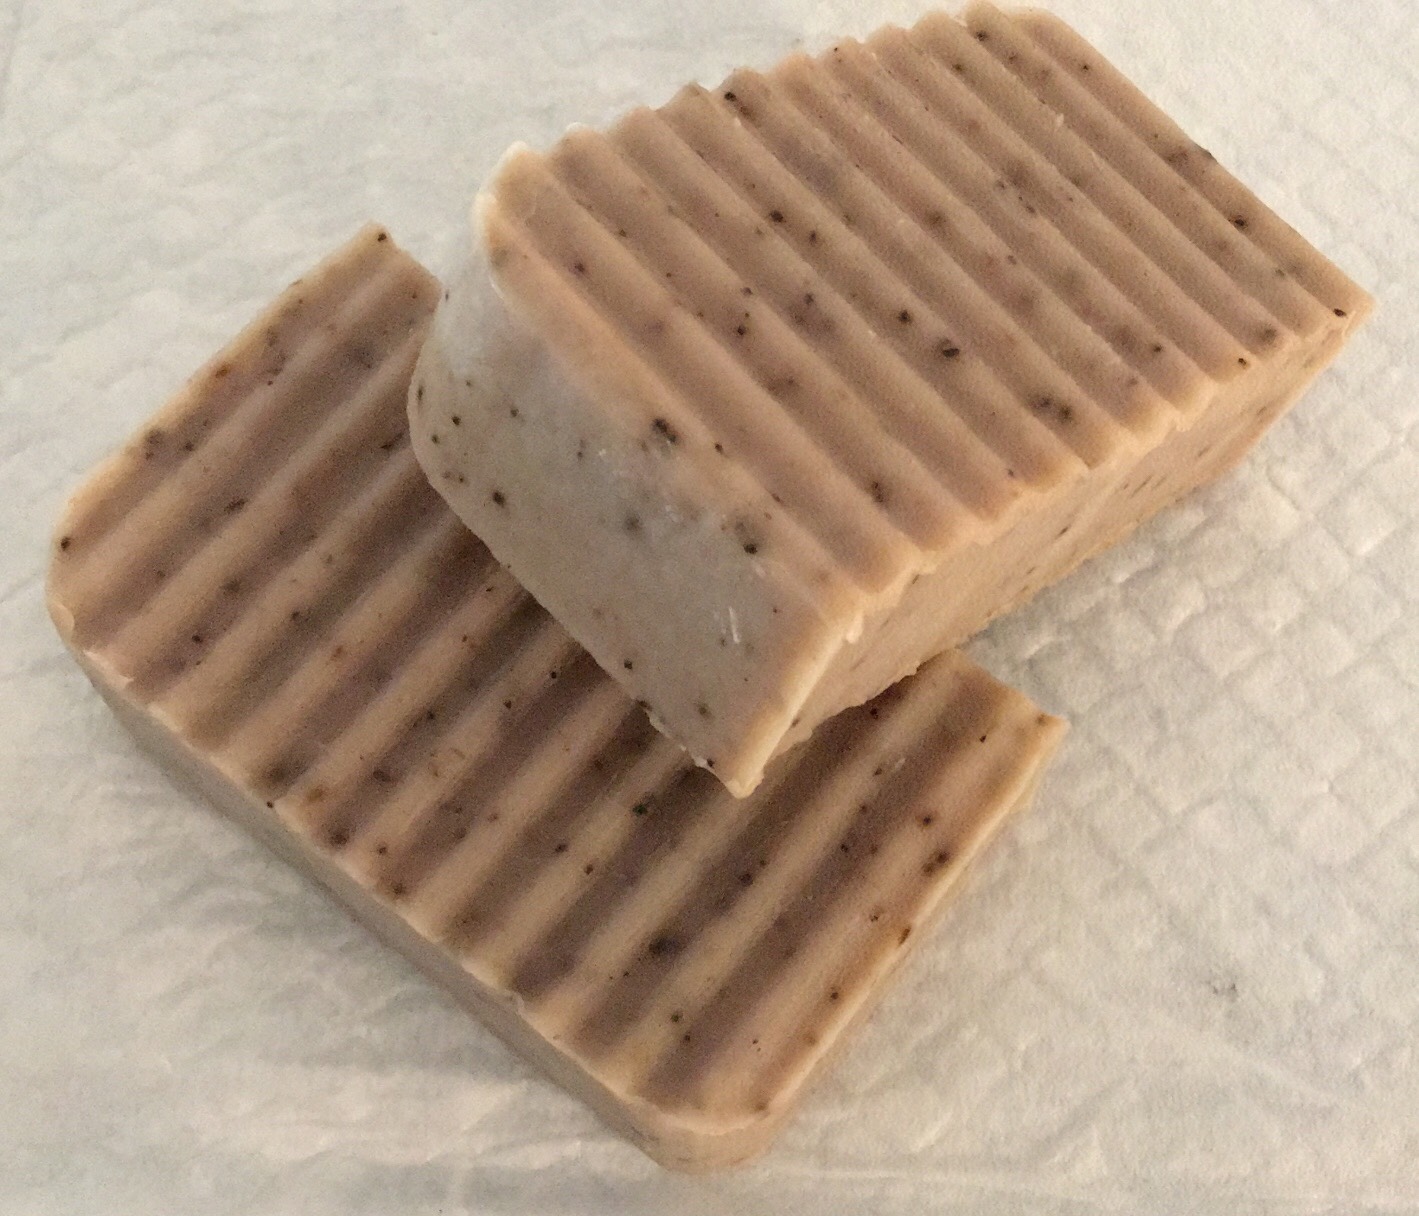 Student Suzanne soap.jpg